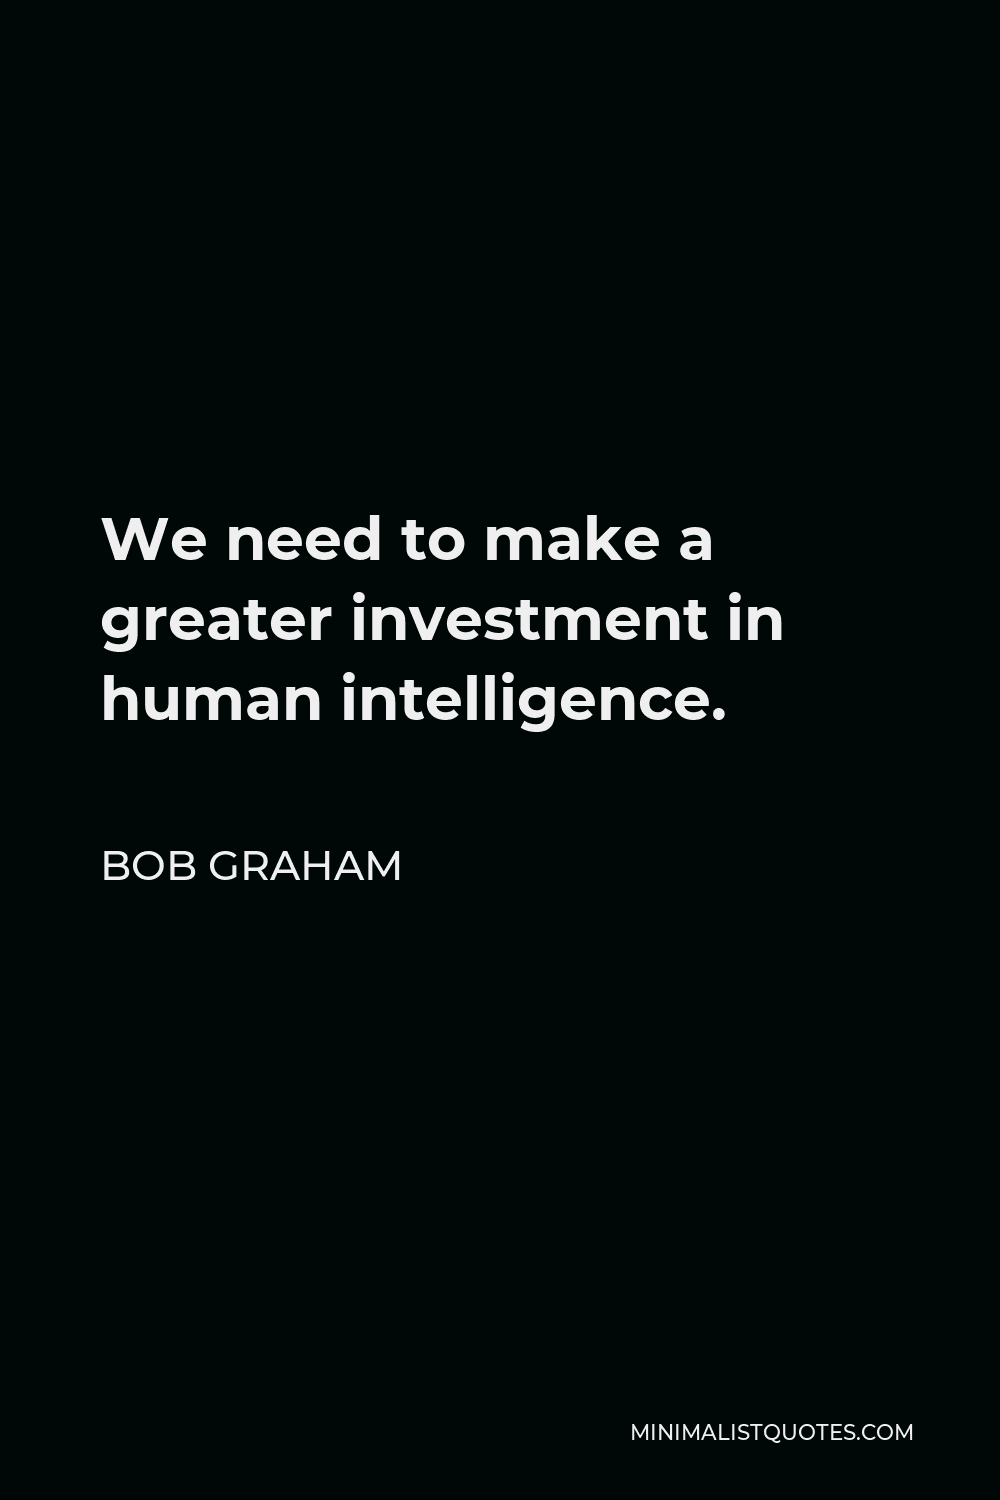 Bob Graham Quote - We need to make a greater investment in human intelligence.